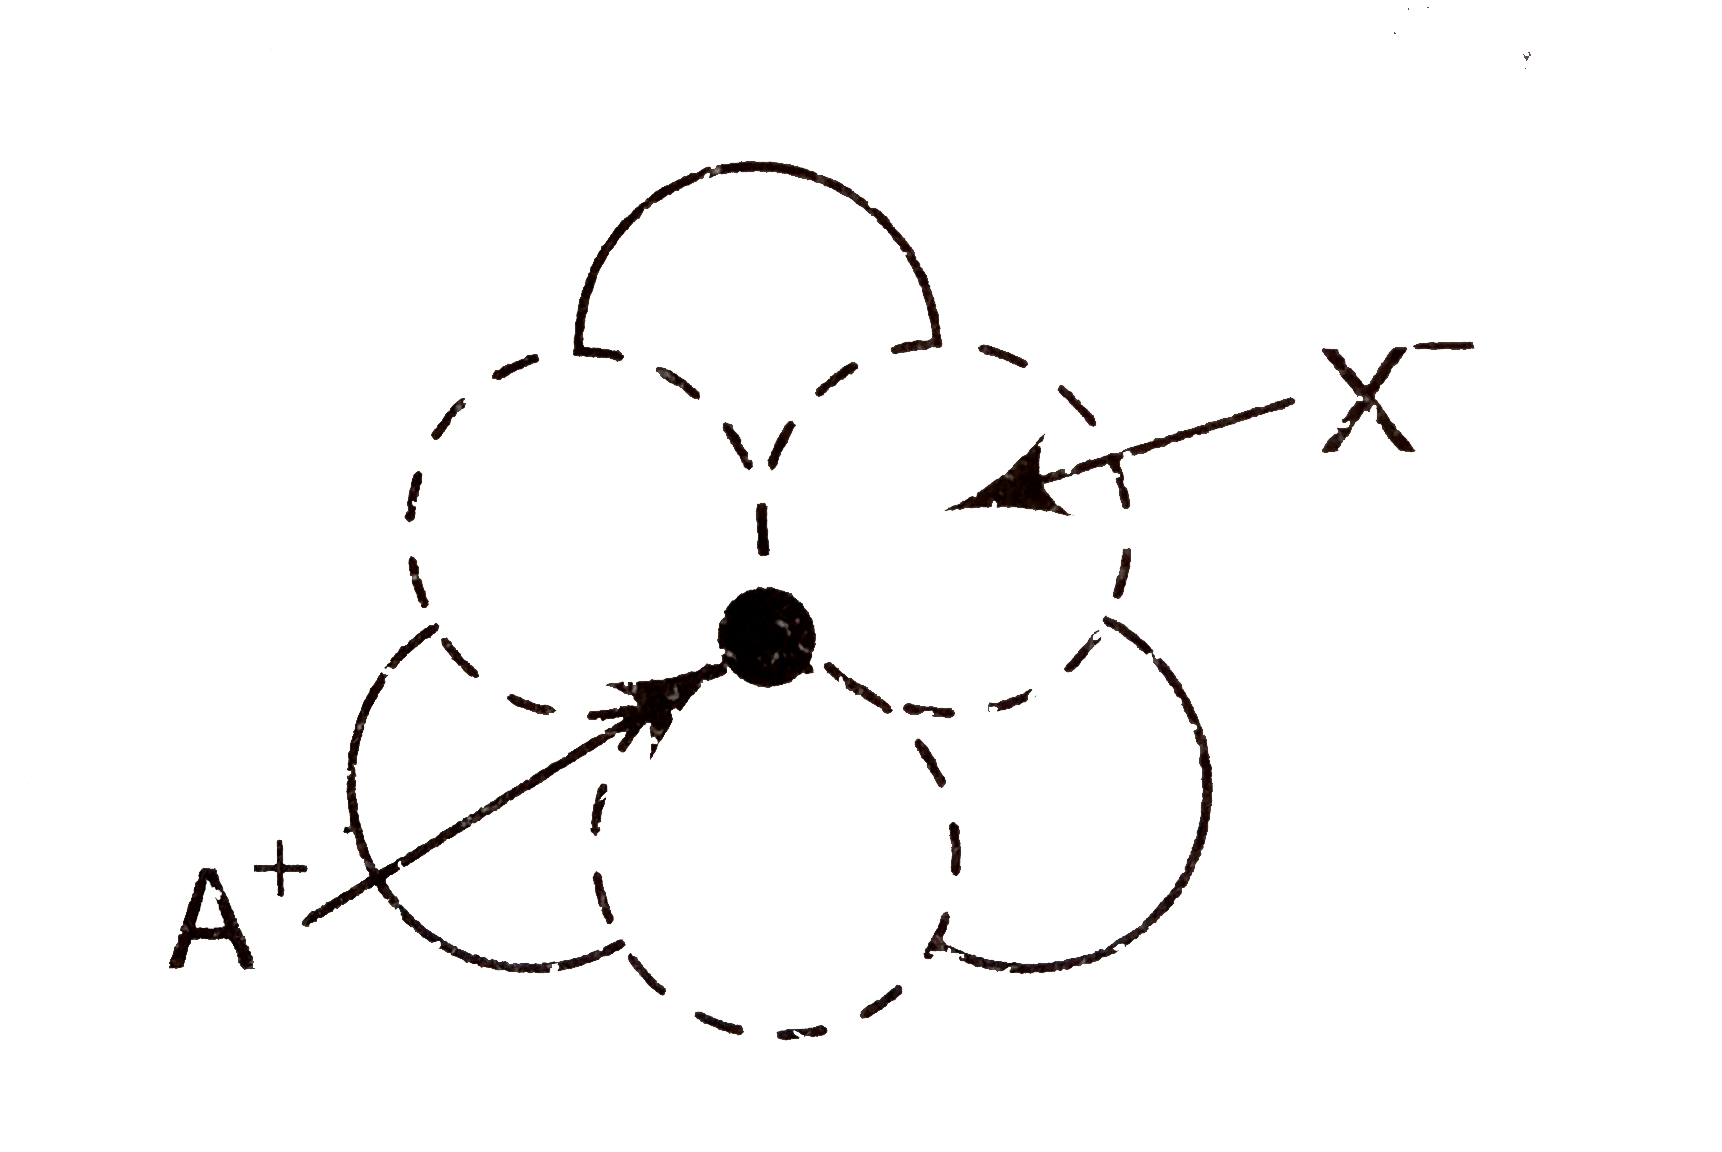 The arrangement of X^(-) ions around A^(+) in solids AX is given in the figure (not drawn to scale). if the radius of X^(-) is 250 pm, the radius of A^(+) is